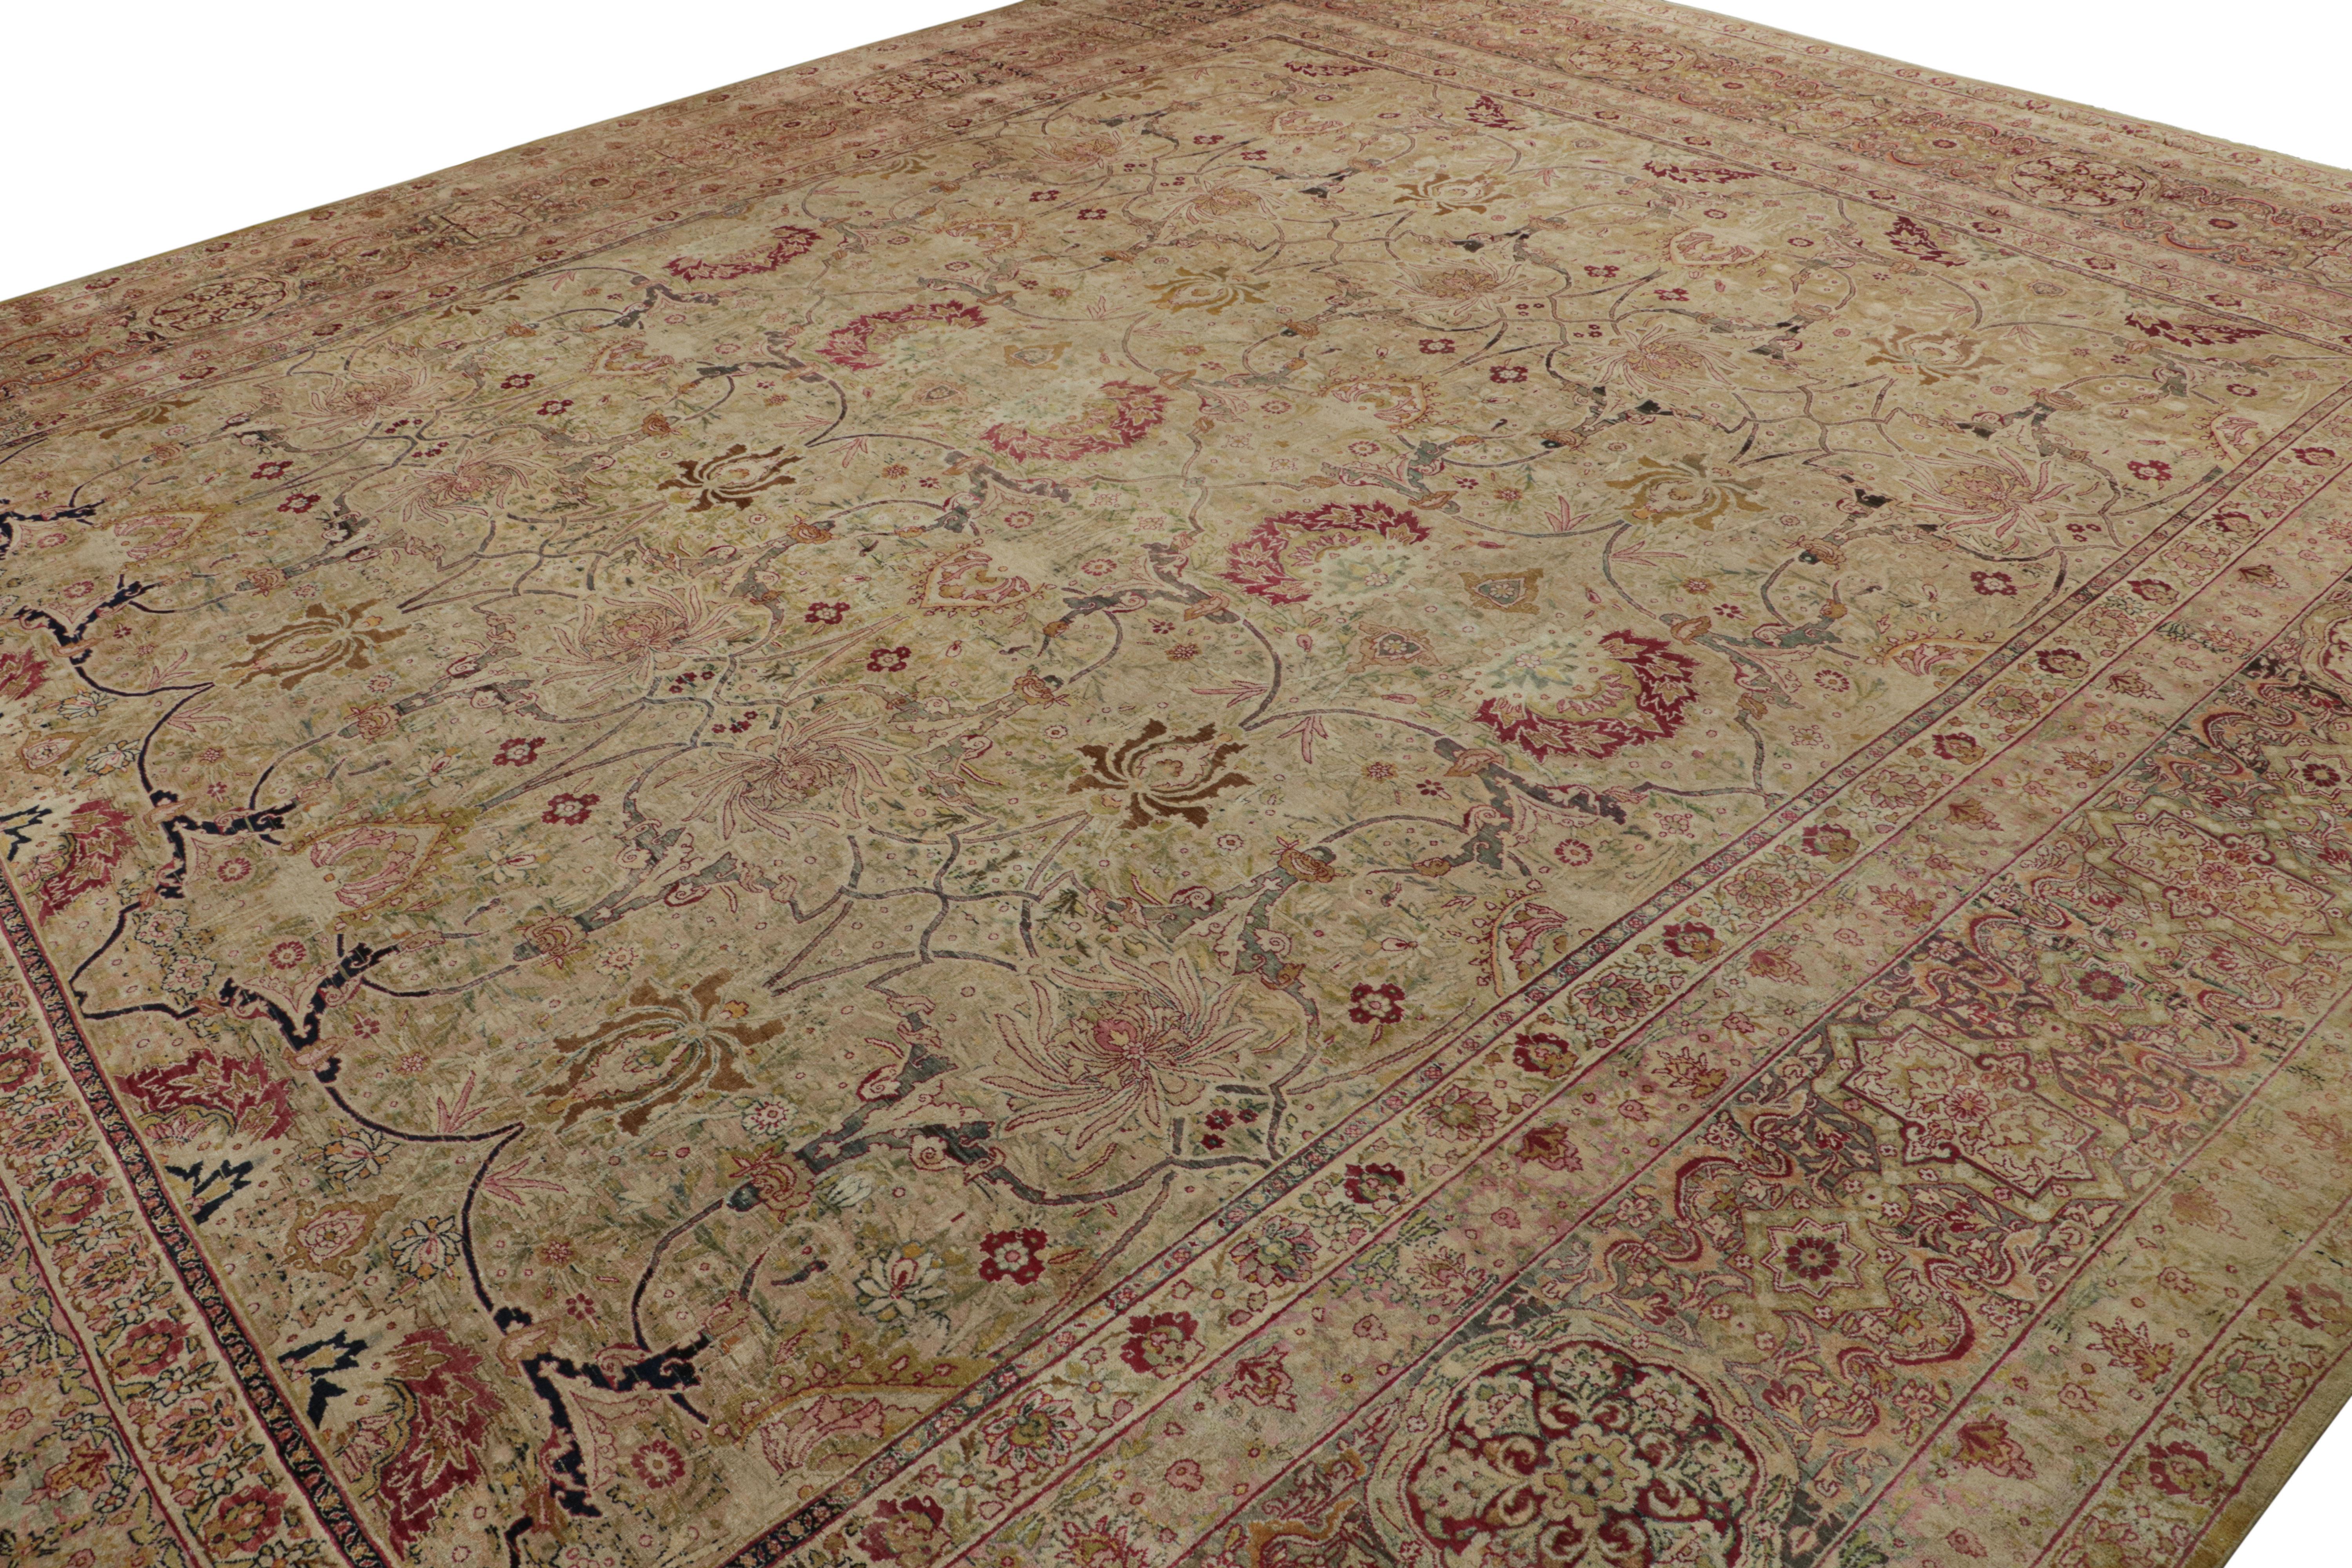 Antique Persian Kerman Lavar Rug with Floral Patterns In Good Condition For Sale In Long Island City, NY